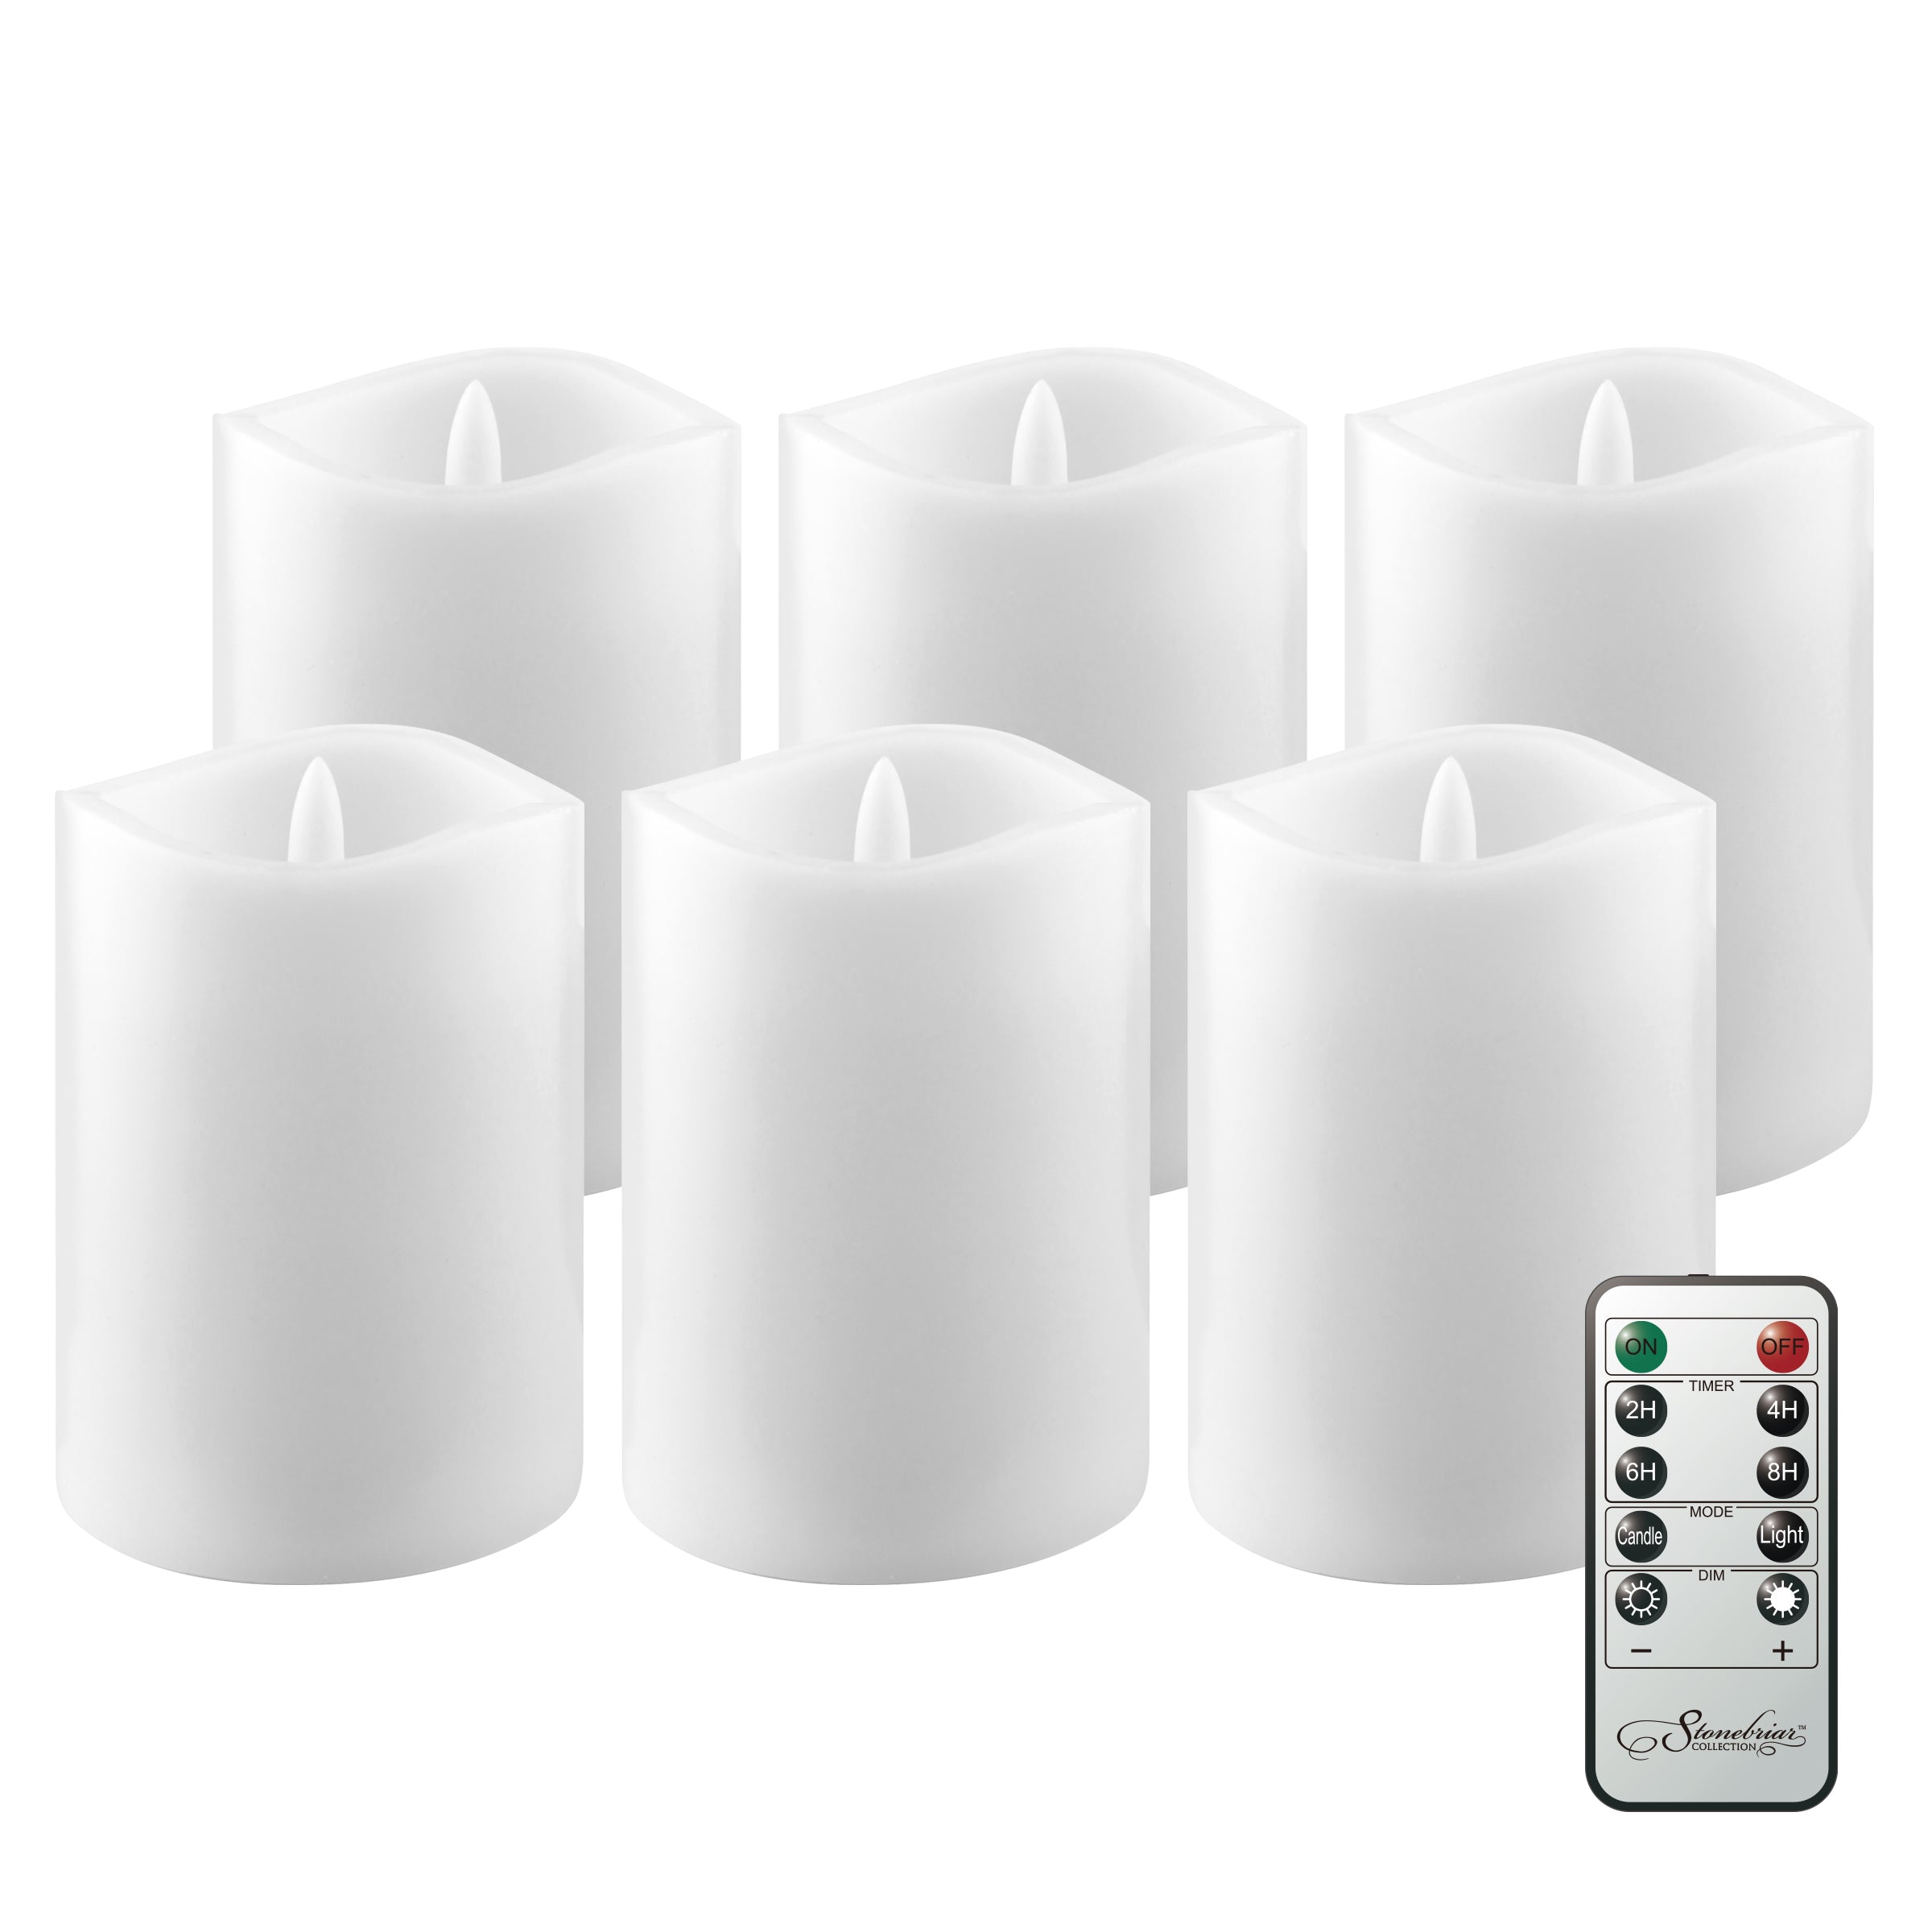 6 Pack Real Wax 3x4 Flameless LED Pillar Candles with Remote and Timer